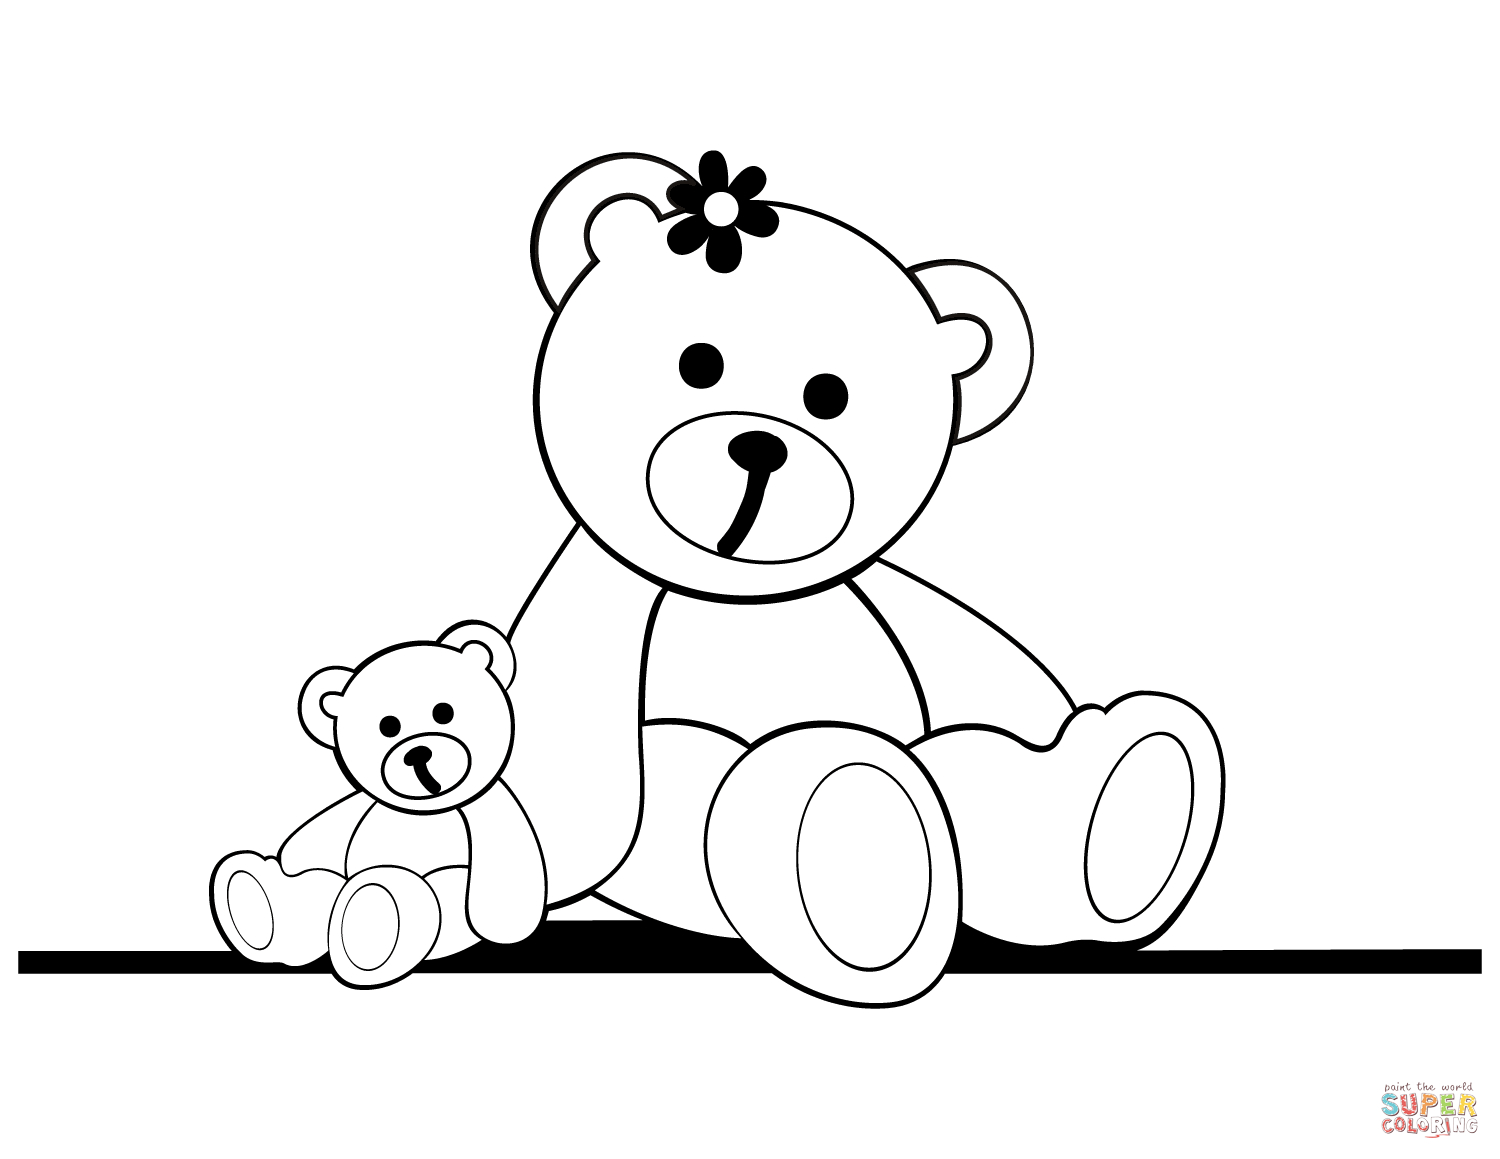 Valentine Teddy Bear Coloring Pages Teddy Bears Coloring Page Free Printable Coloring Pages